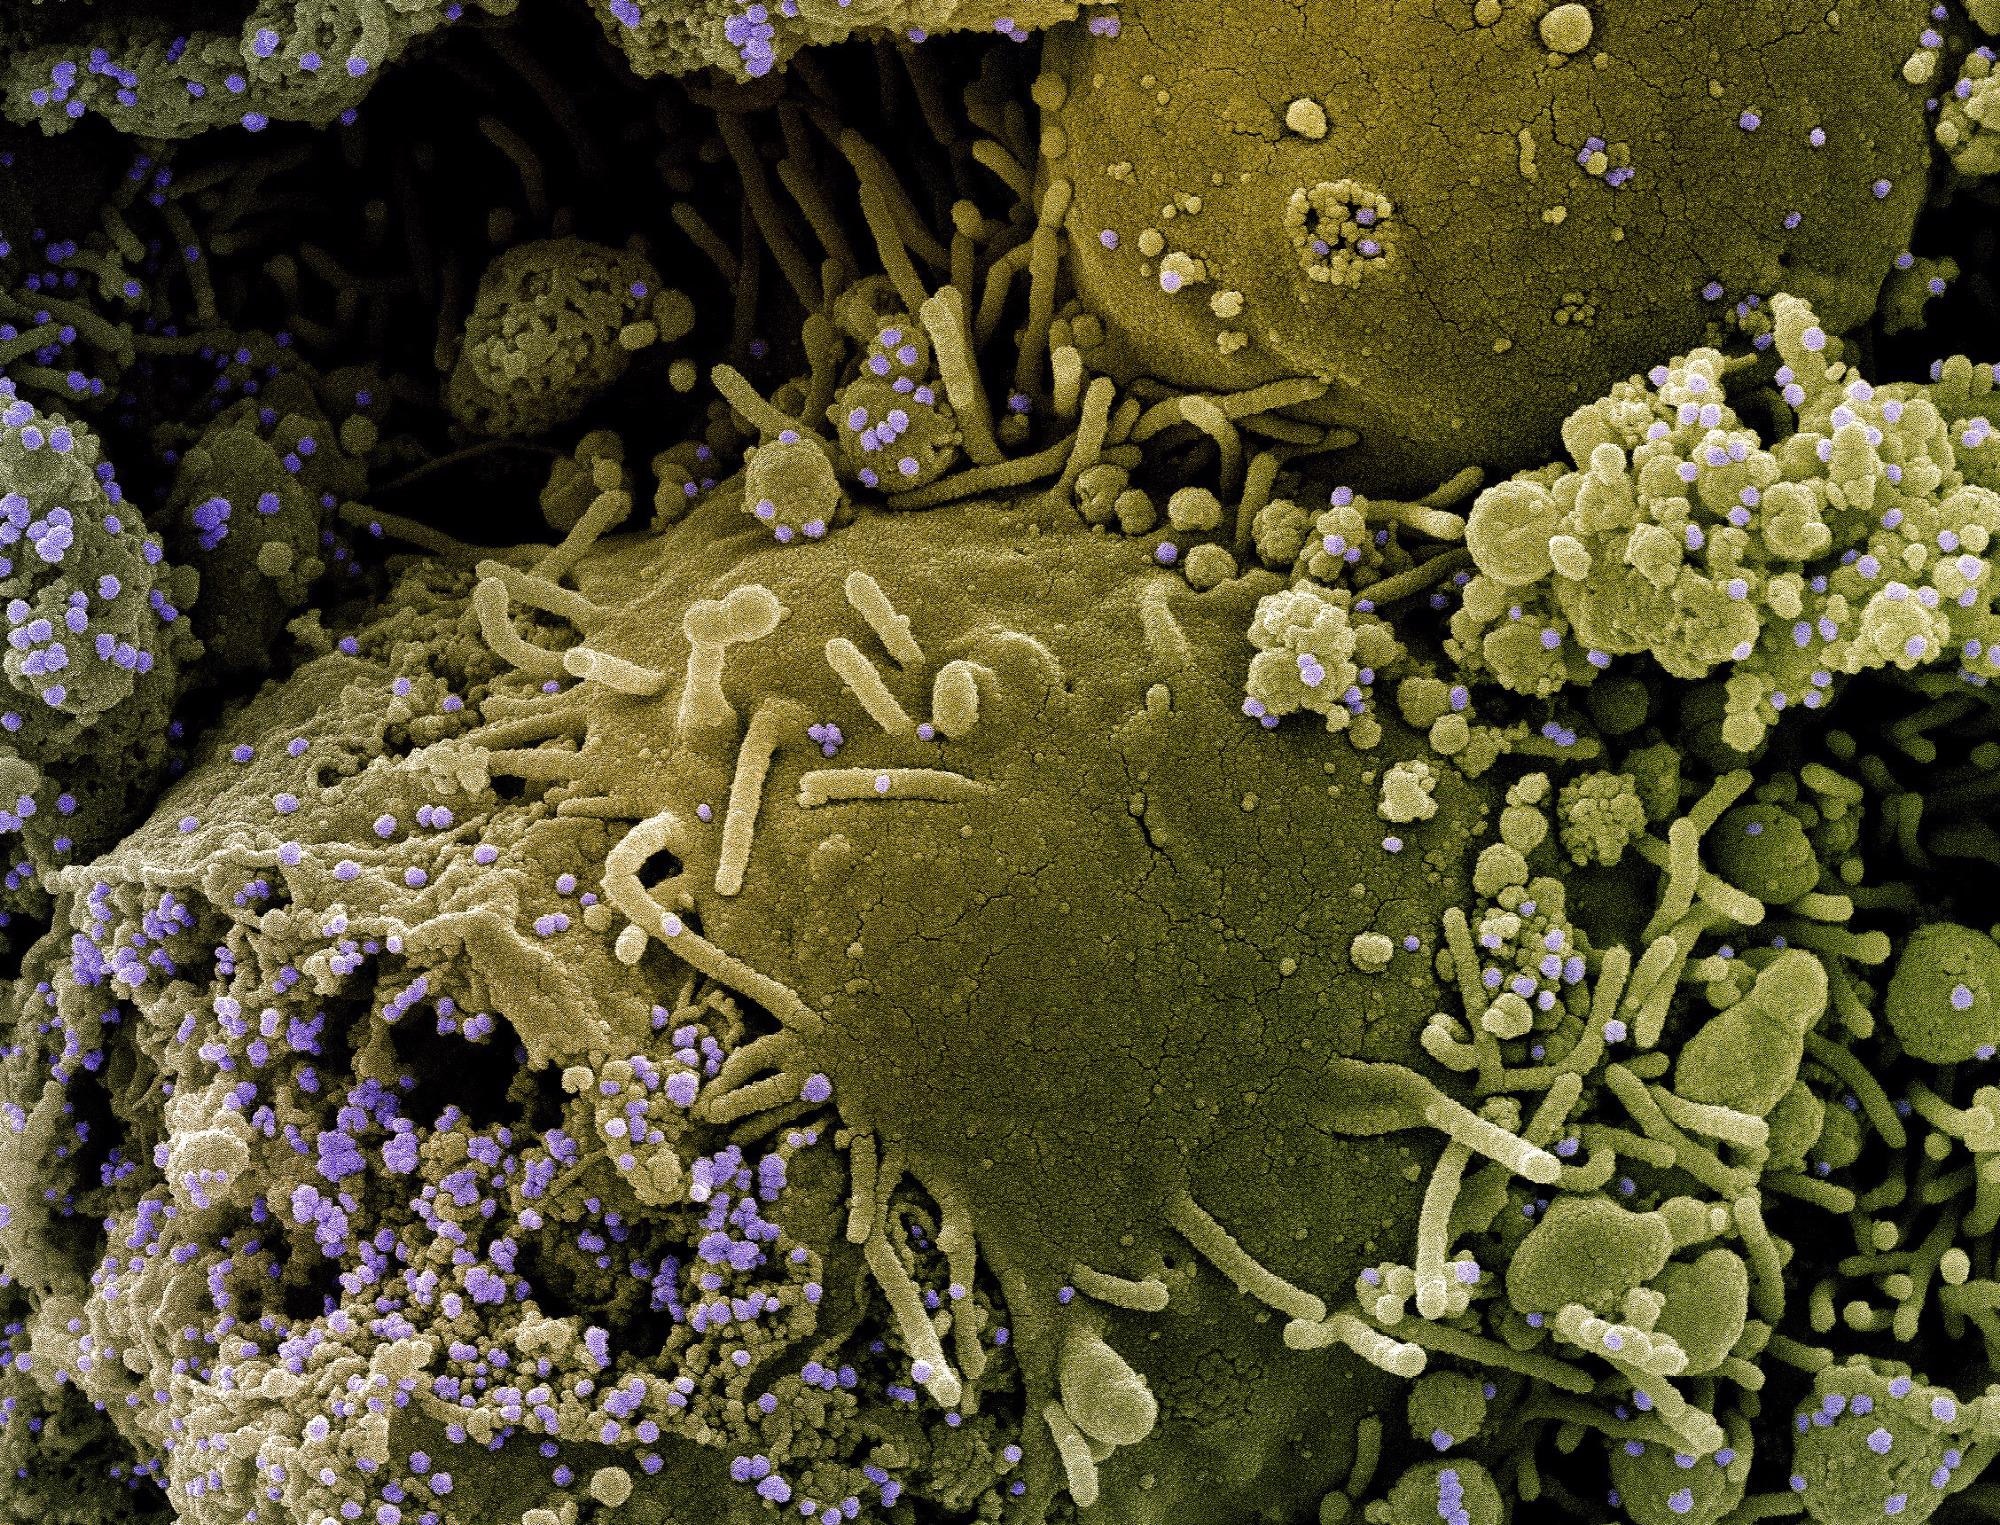 Colorized scanning electron micrograph of chronically infected and partially lysed cells (olive green) infected with a variant strain of SARS-CoV-2 virus particles (purple), isolated from a patient sample.. Image Credit: NIAID